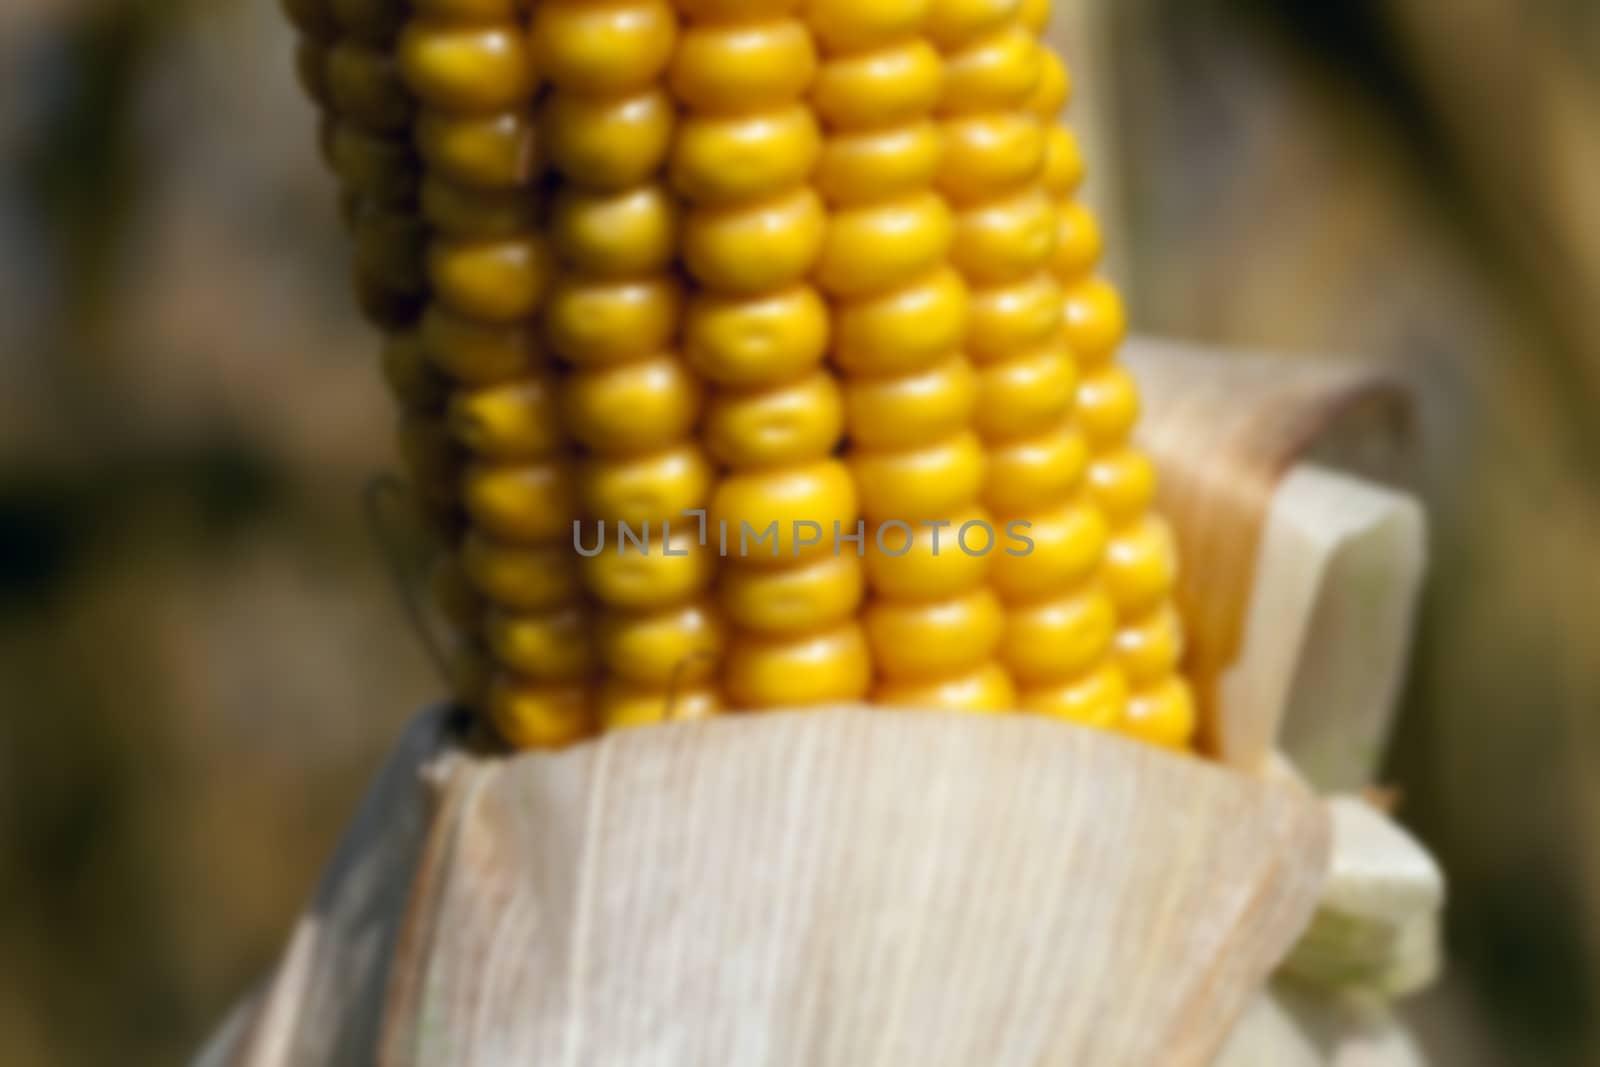 Agricultural field on which photographed mature yellowed corn, close up, natural foods, defocus